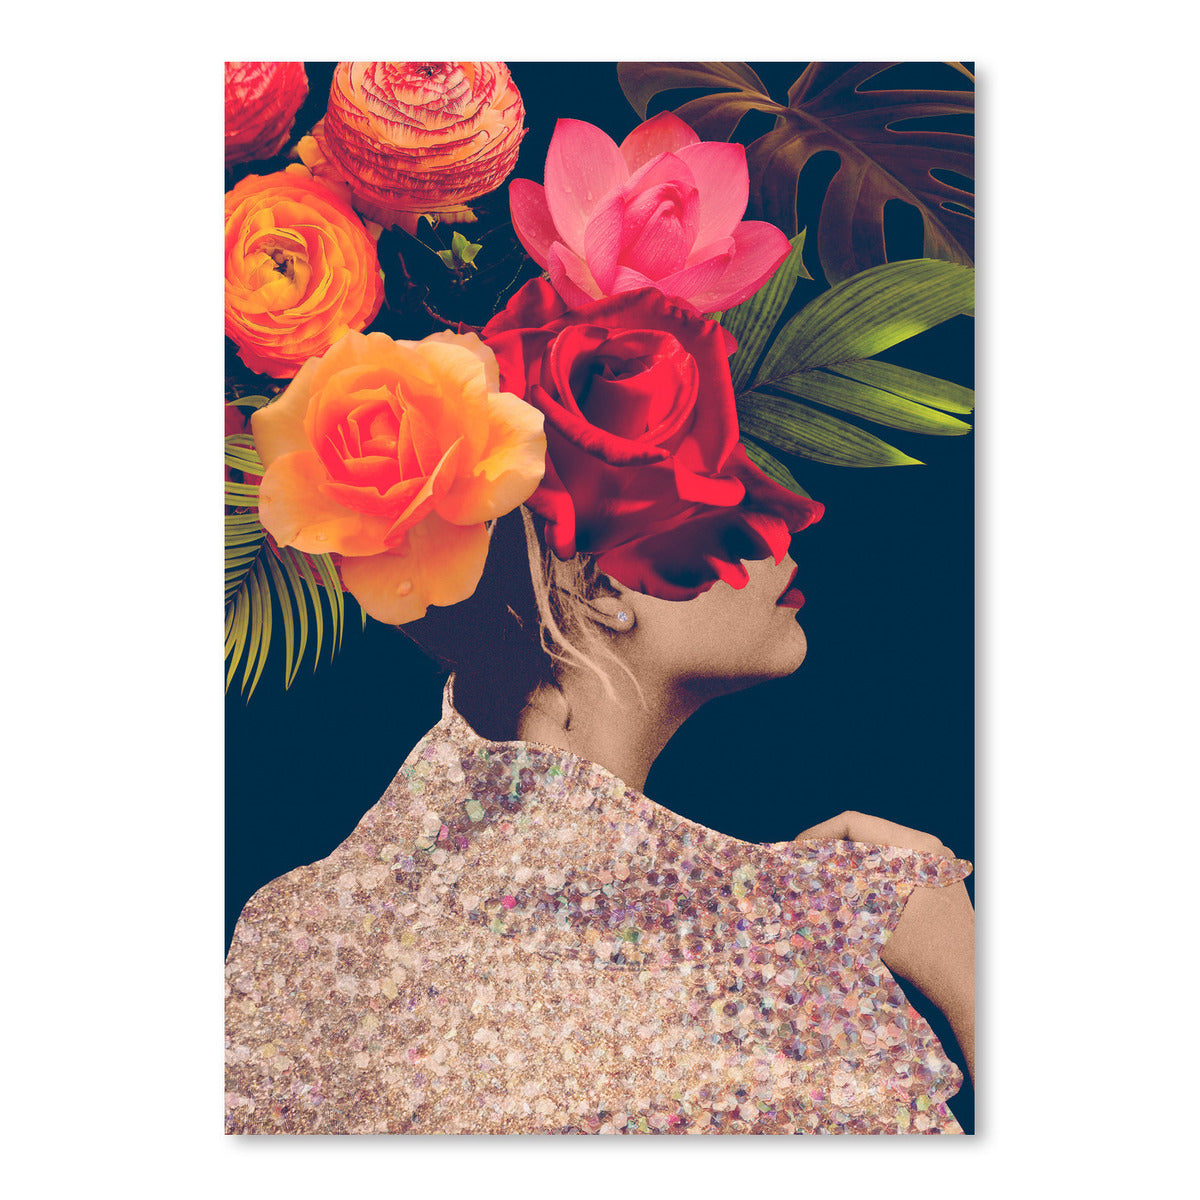 Fleur Collage II by Victoria Borges by World Art Group - Art Print - Americanflat